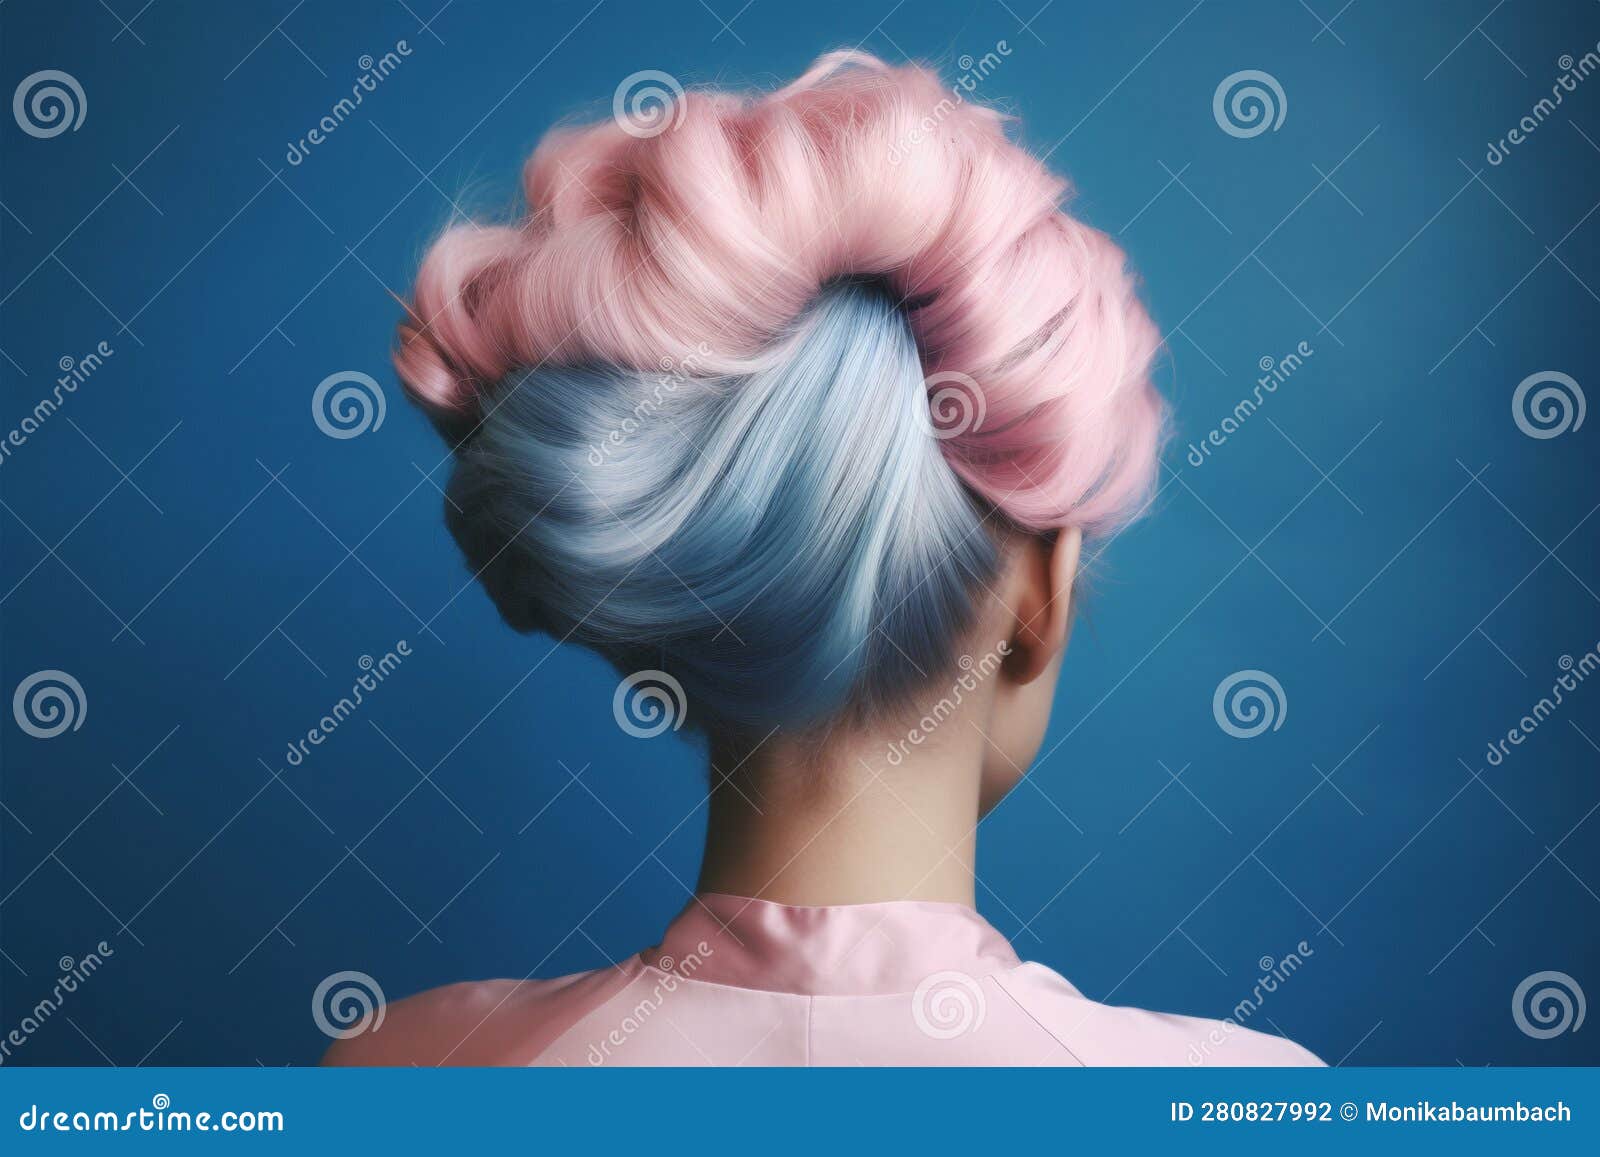 4. Best Products for Maintaining Bright Pink and Blue Hair - wide 6